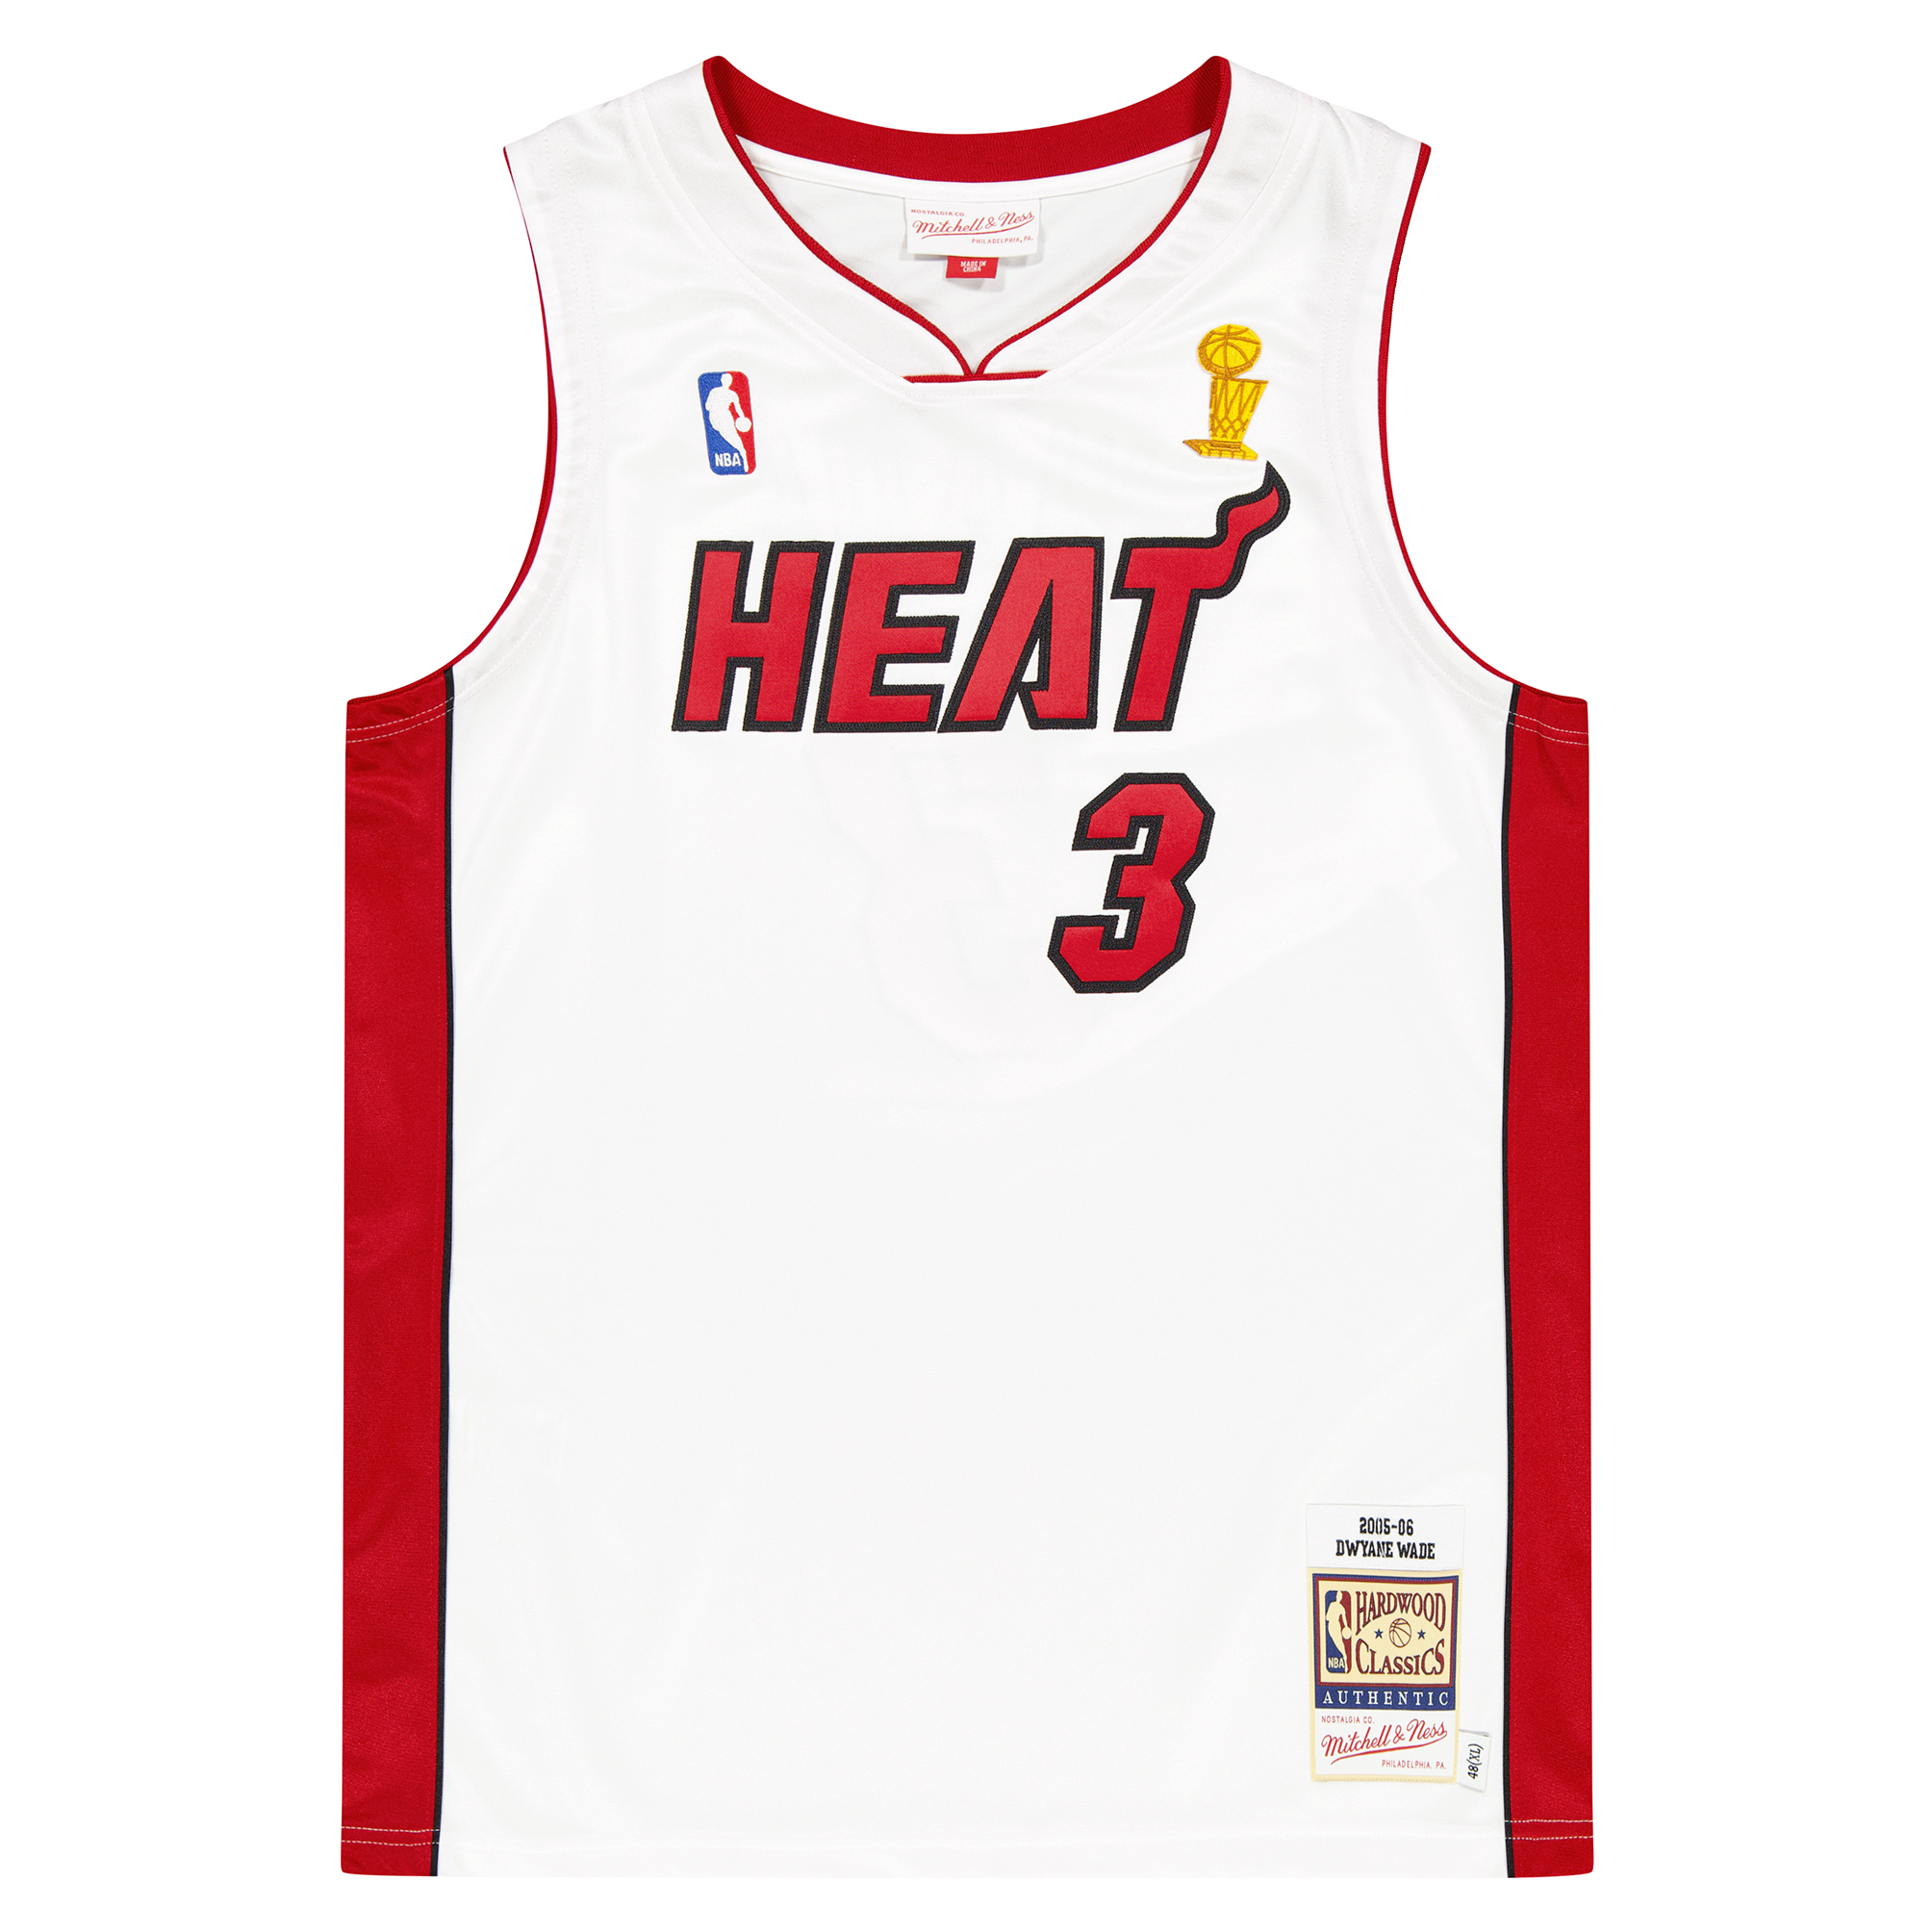 Dwayne Wade Miami heat nba jersey youth small 8 home white , stitched  numbers & - clothing & accessories - by owner 